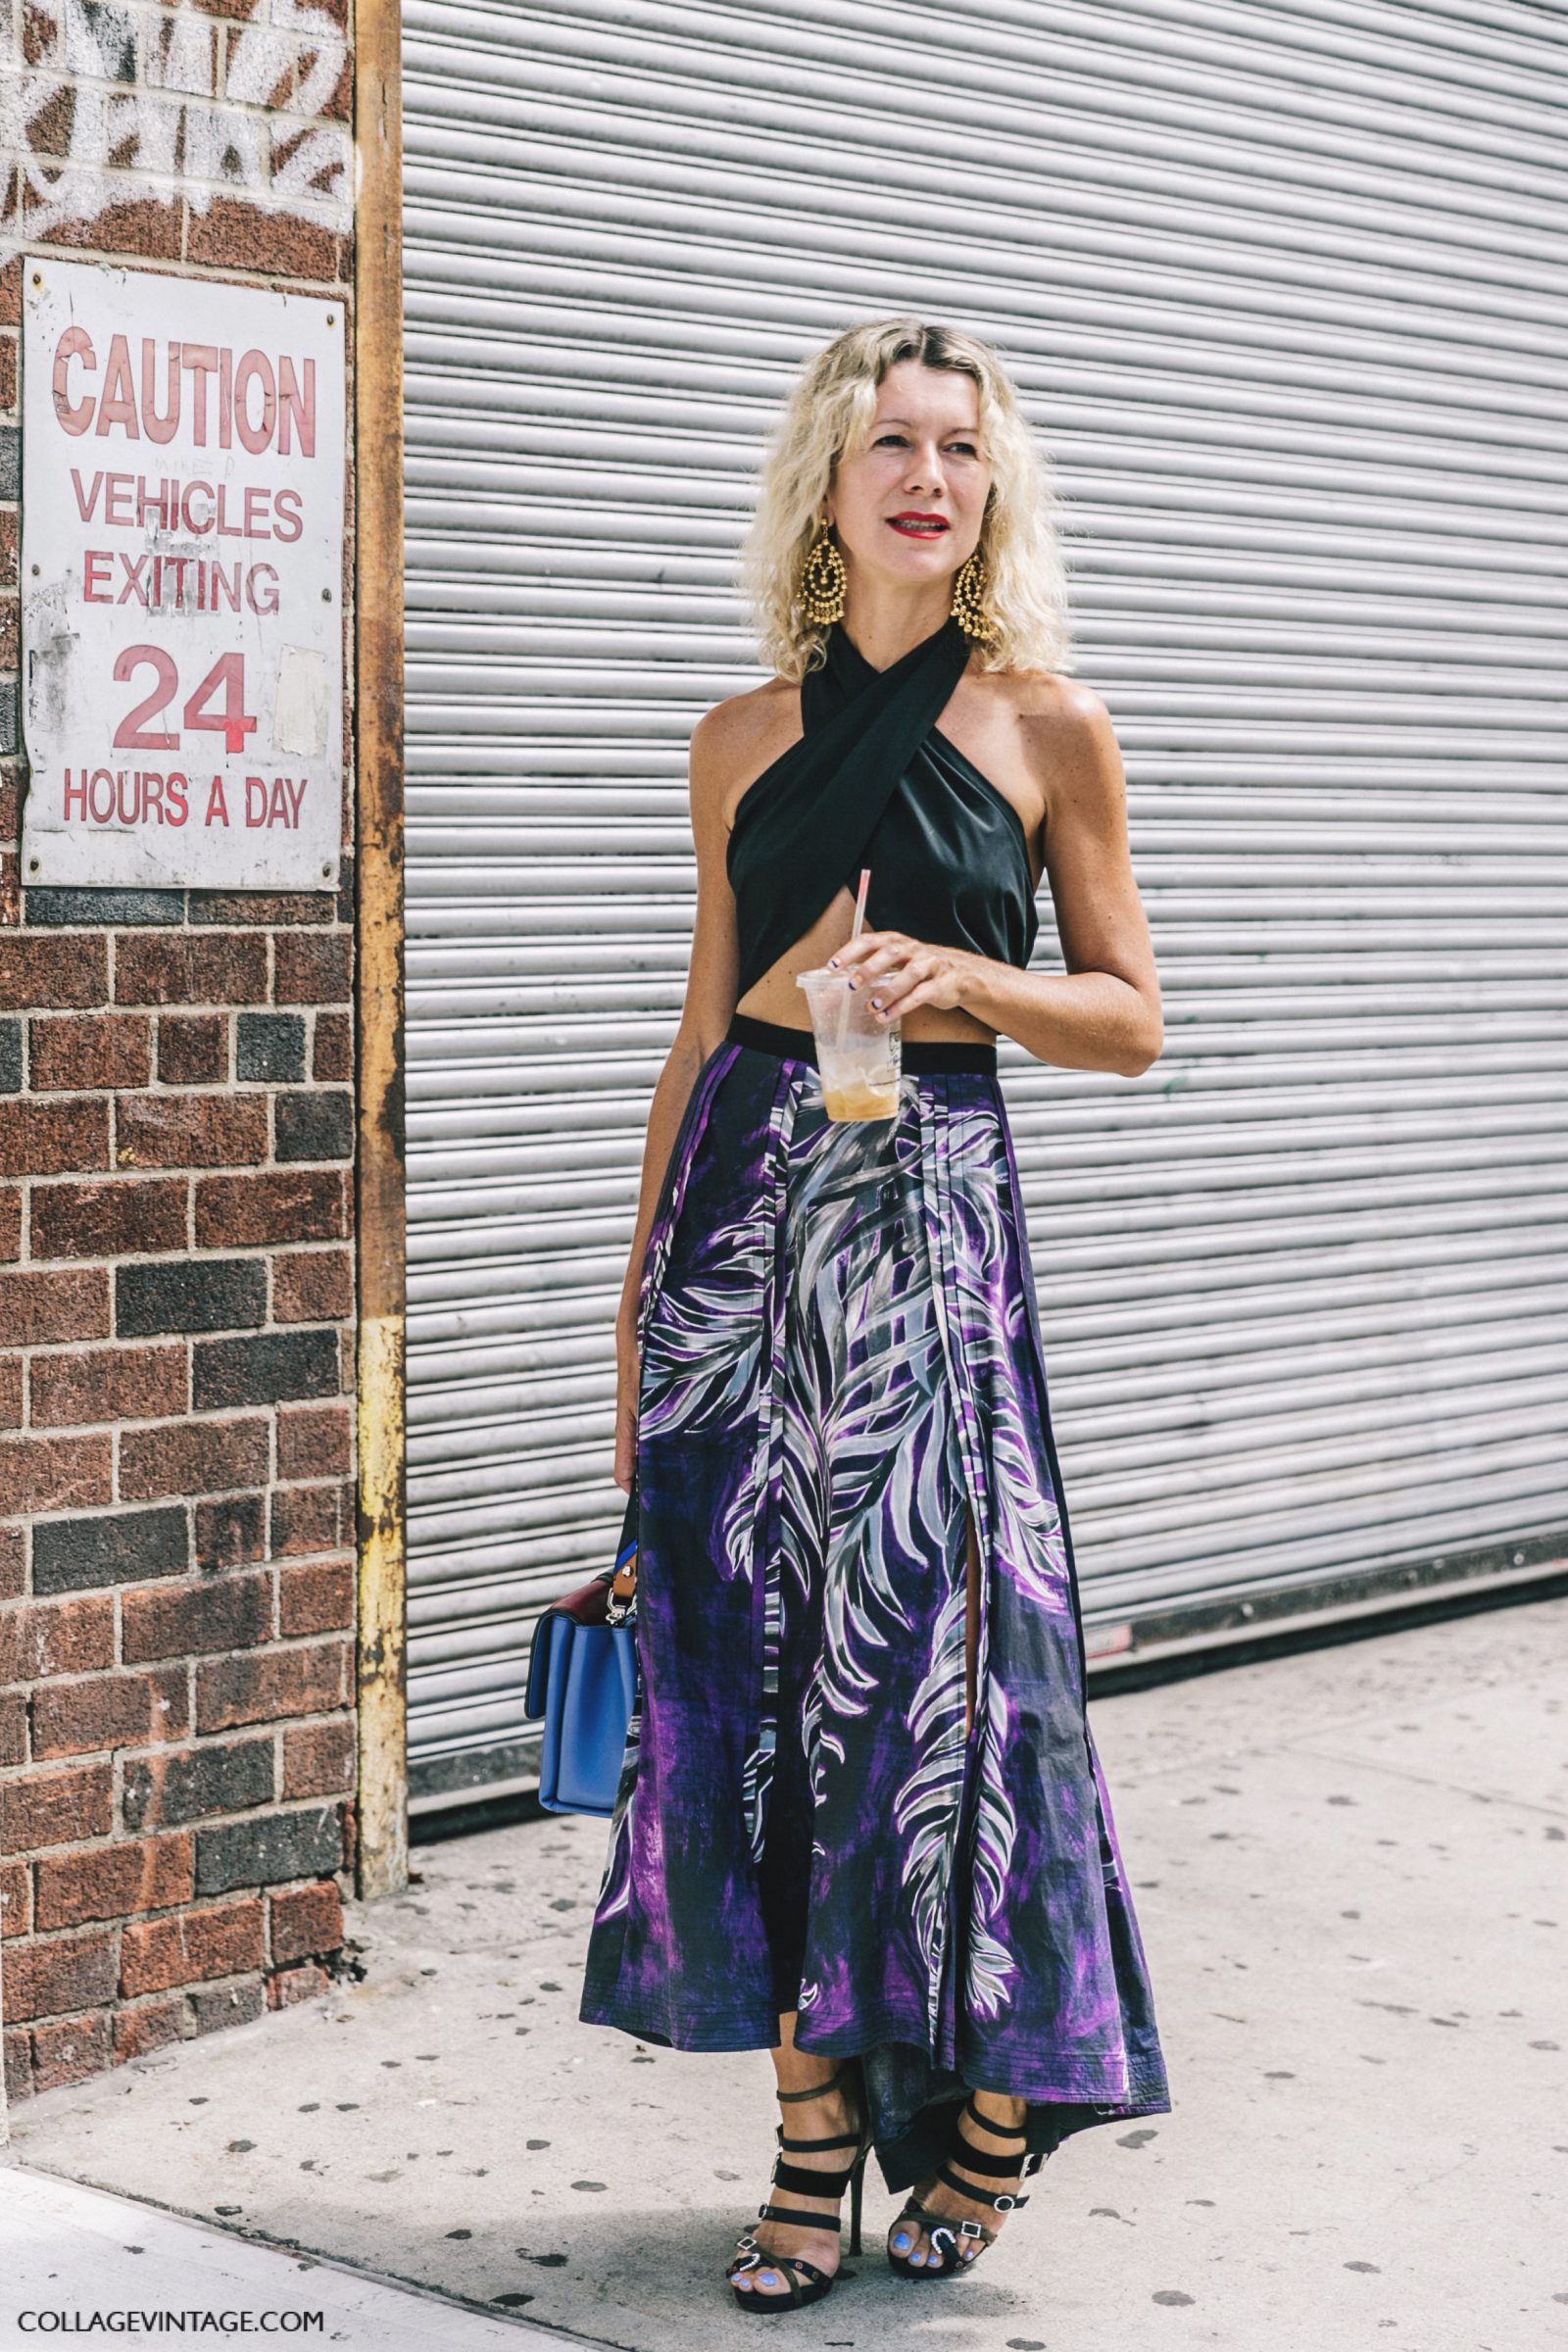 nyfw-new_york_fashion_week_ss17-street_style-outfits-collage_vintage-natalie_jobs-crop_top-long_skirt